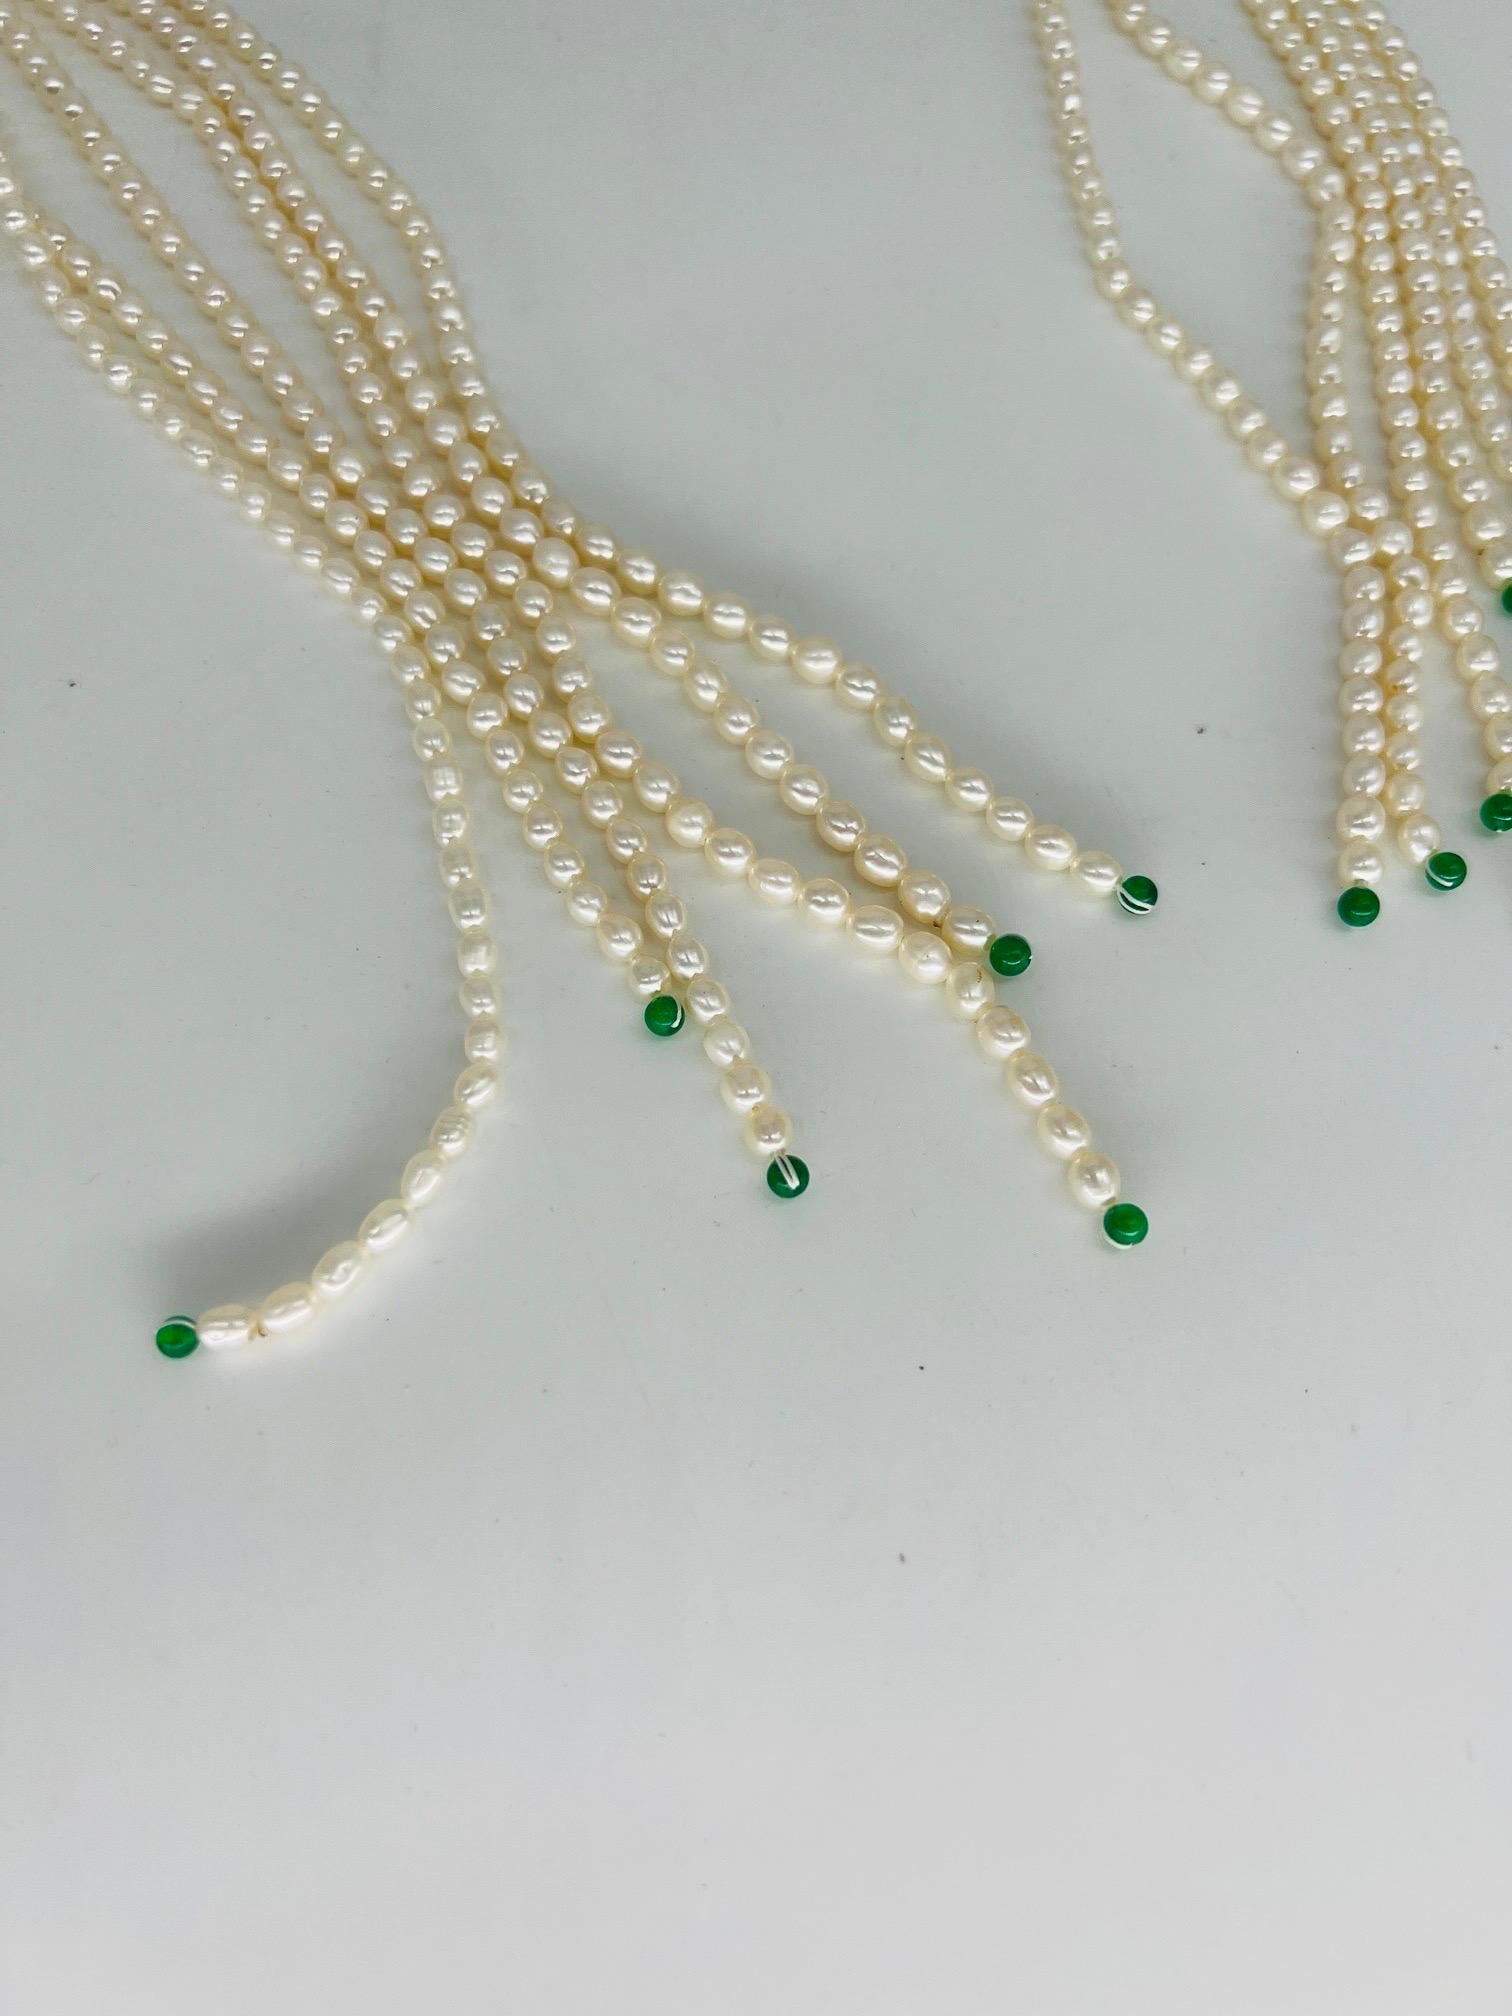 This important necklace features 6 strands of 39.25” string pearls which terminate to tiny green jade rounds. The strands are kept together by a 1.25” w x 1” h green jade necklace “clasp”. The “clasp” adjusts and allows the pearl strands to be set